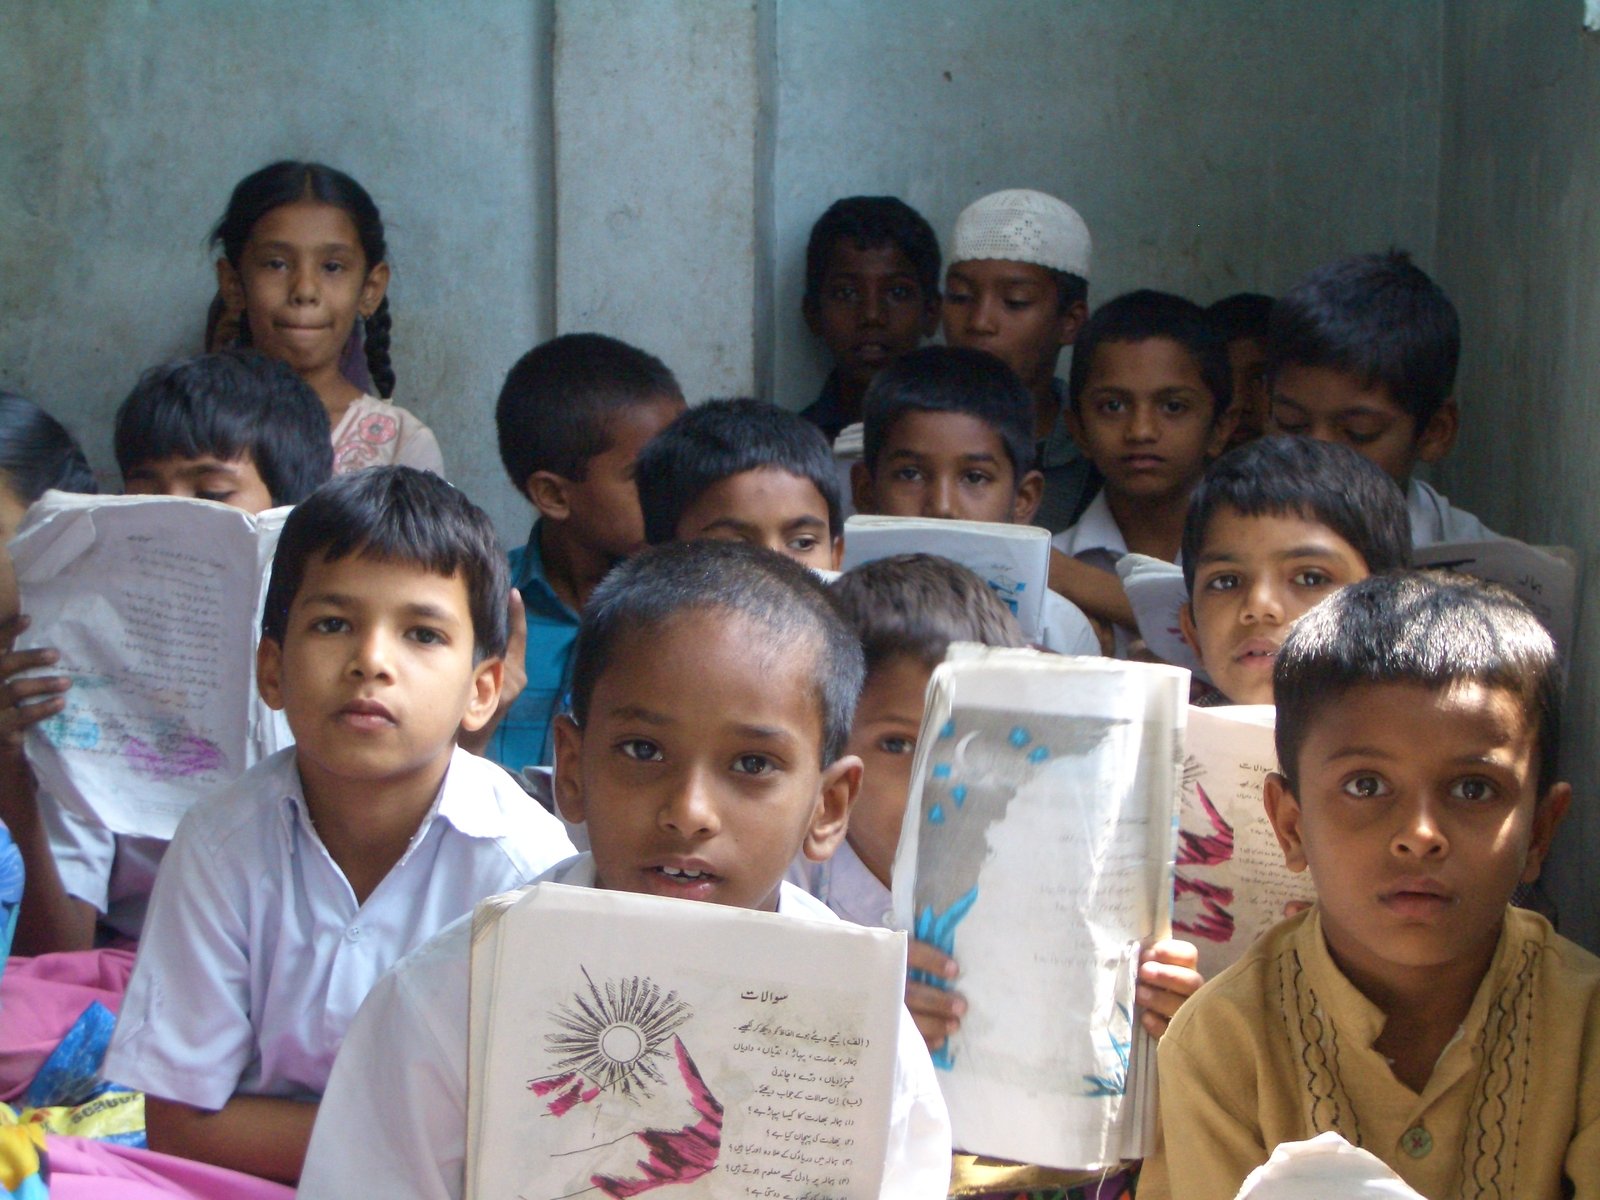 a group of children in school uniforms holding books